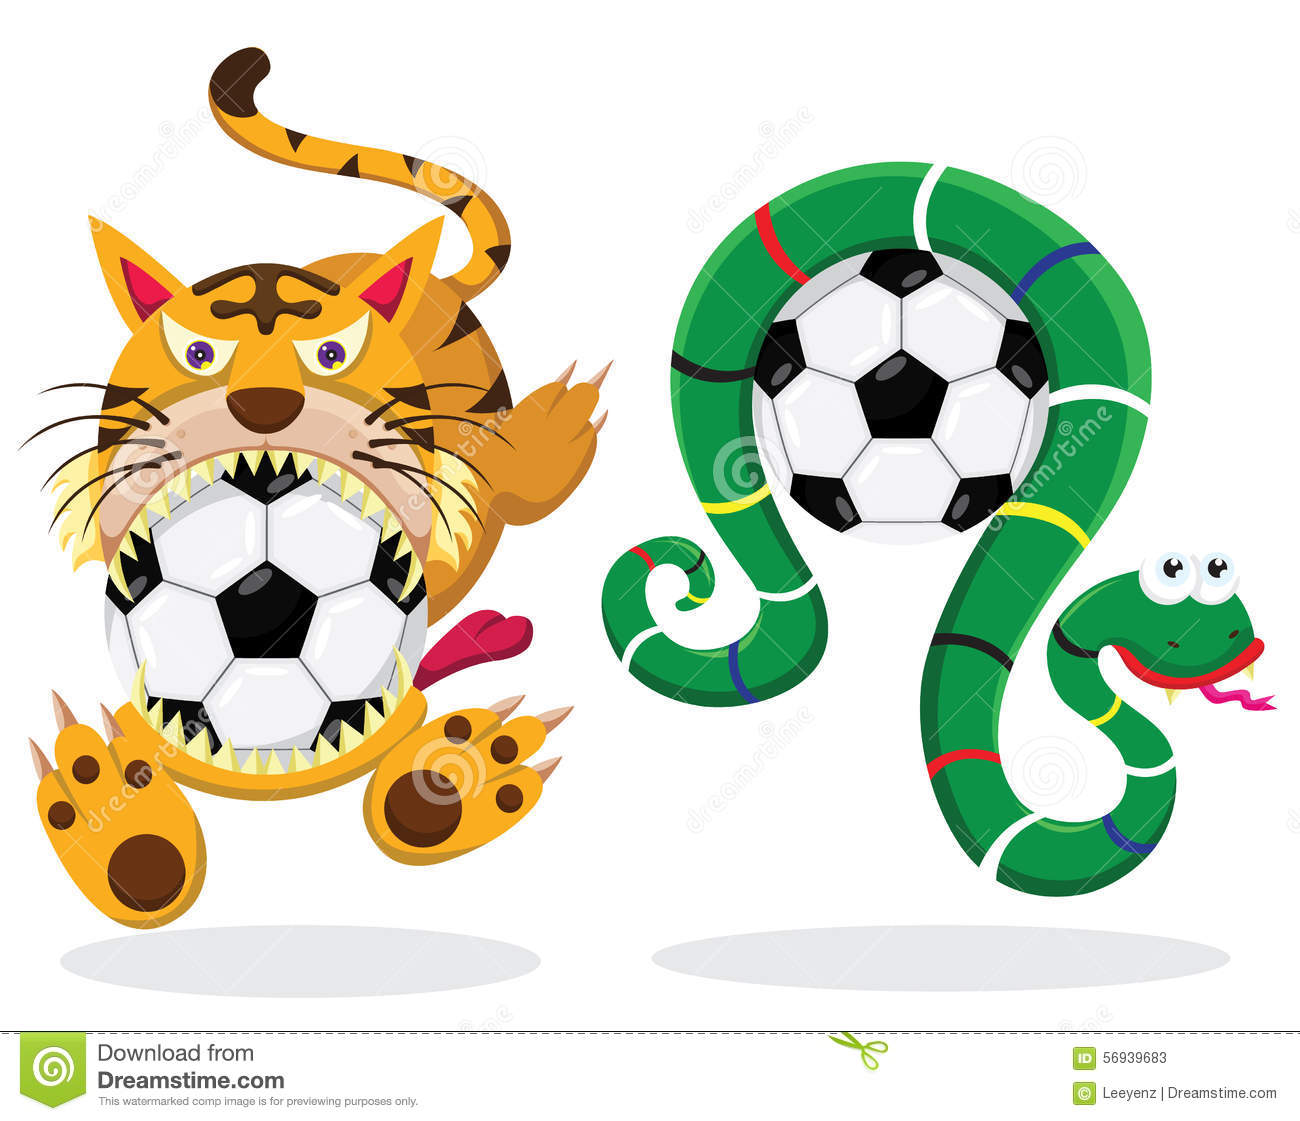 Tiger Snake clipart #12, Download drawings